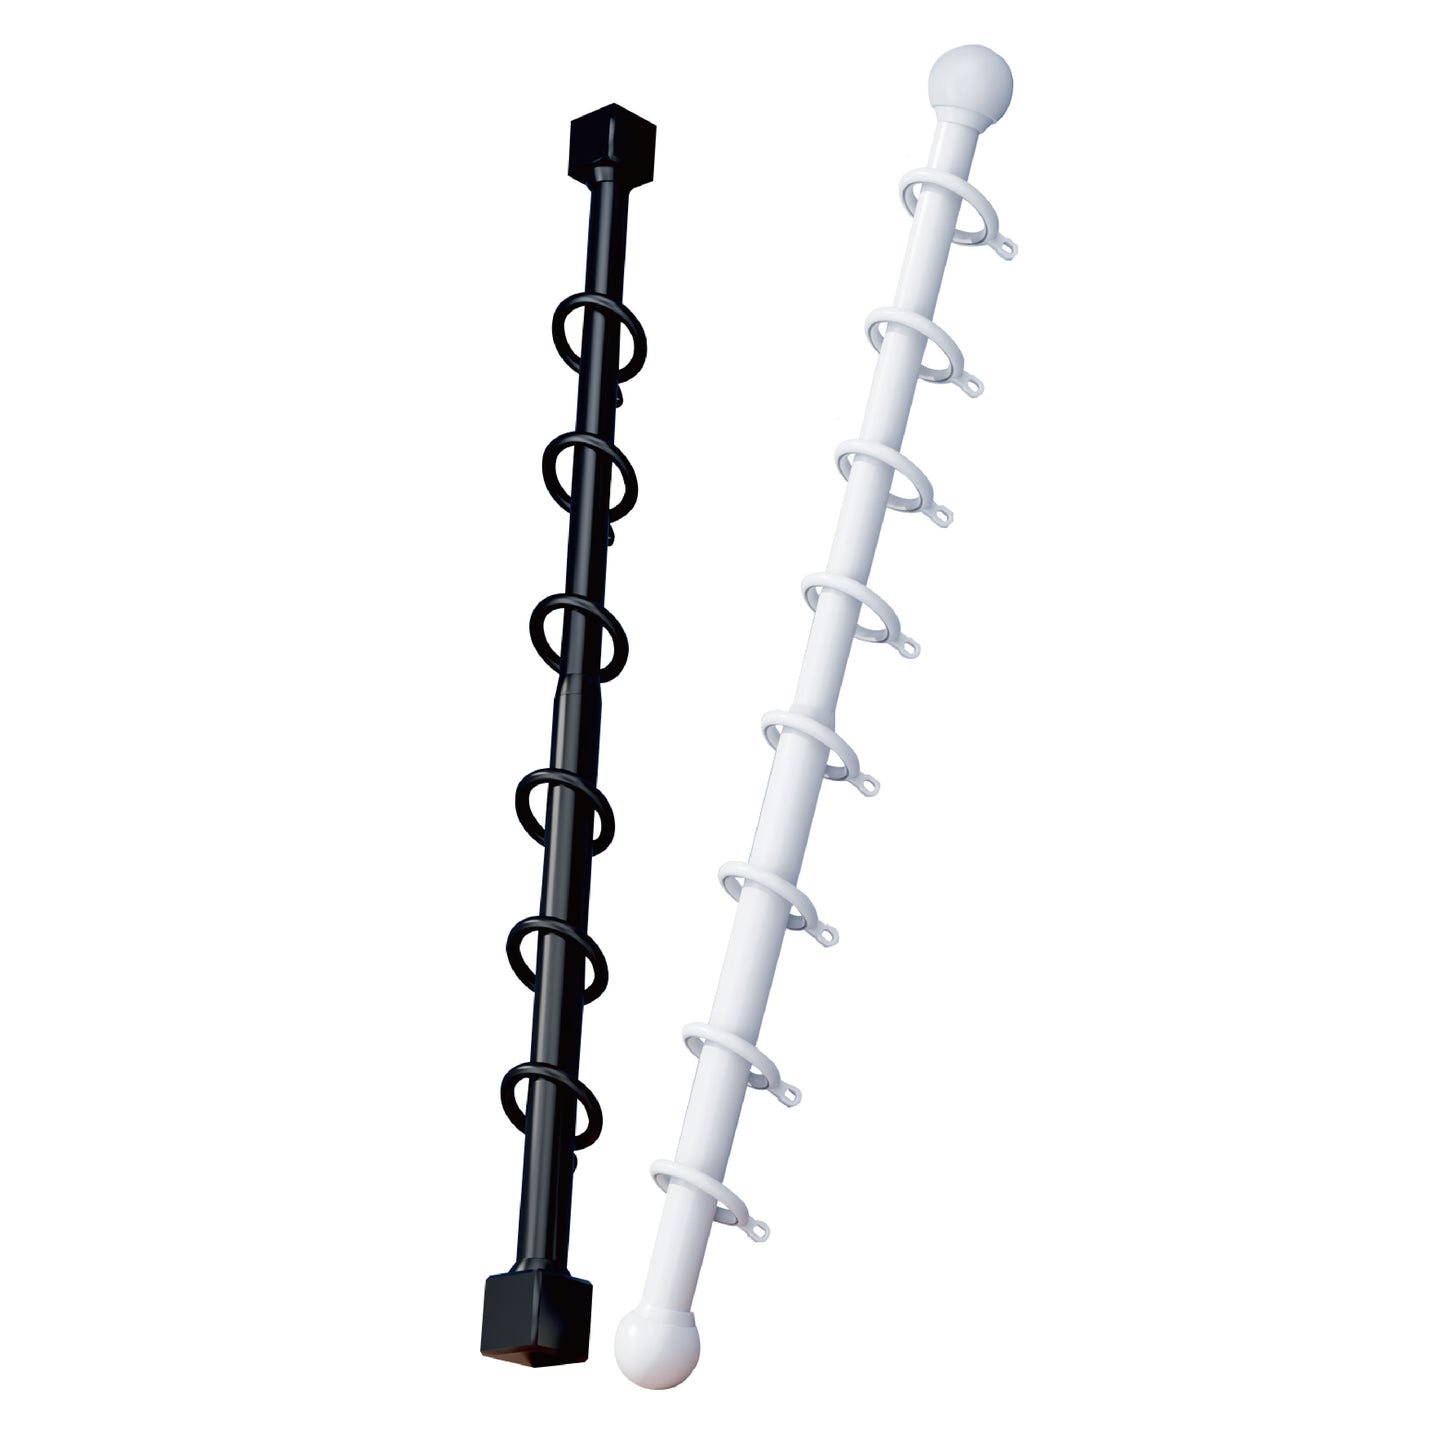 White and black EaseGlide Whisper-Silent Telescoping Roman Rods with decorative finials and evenly spaced ringlets for curtain hanging